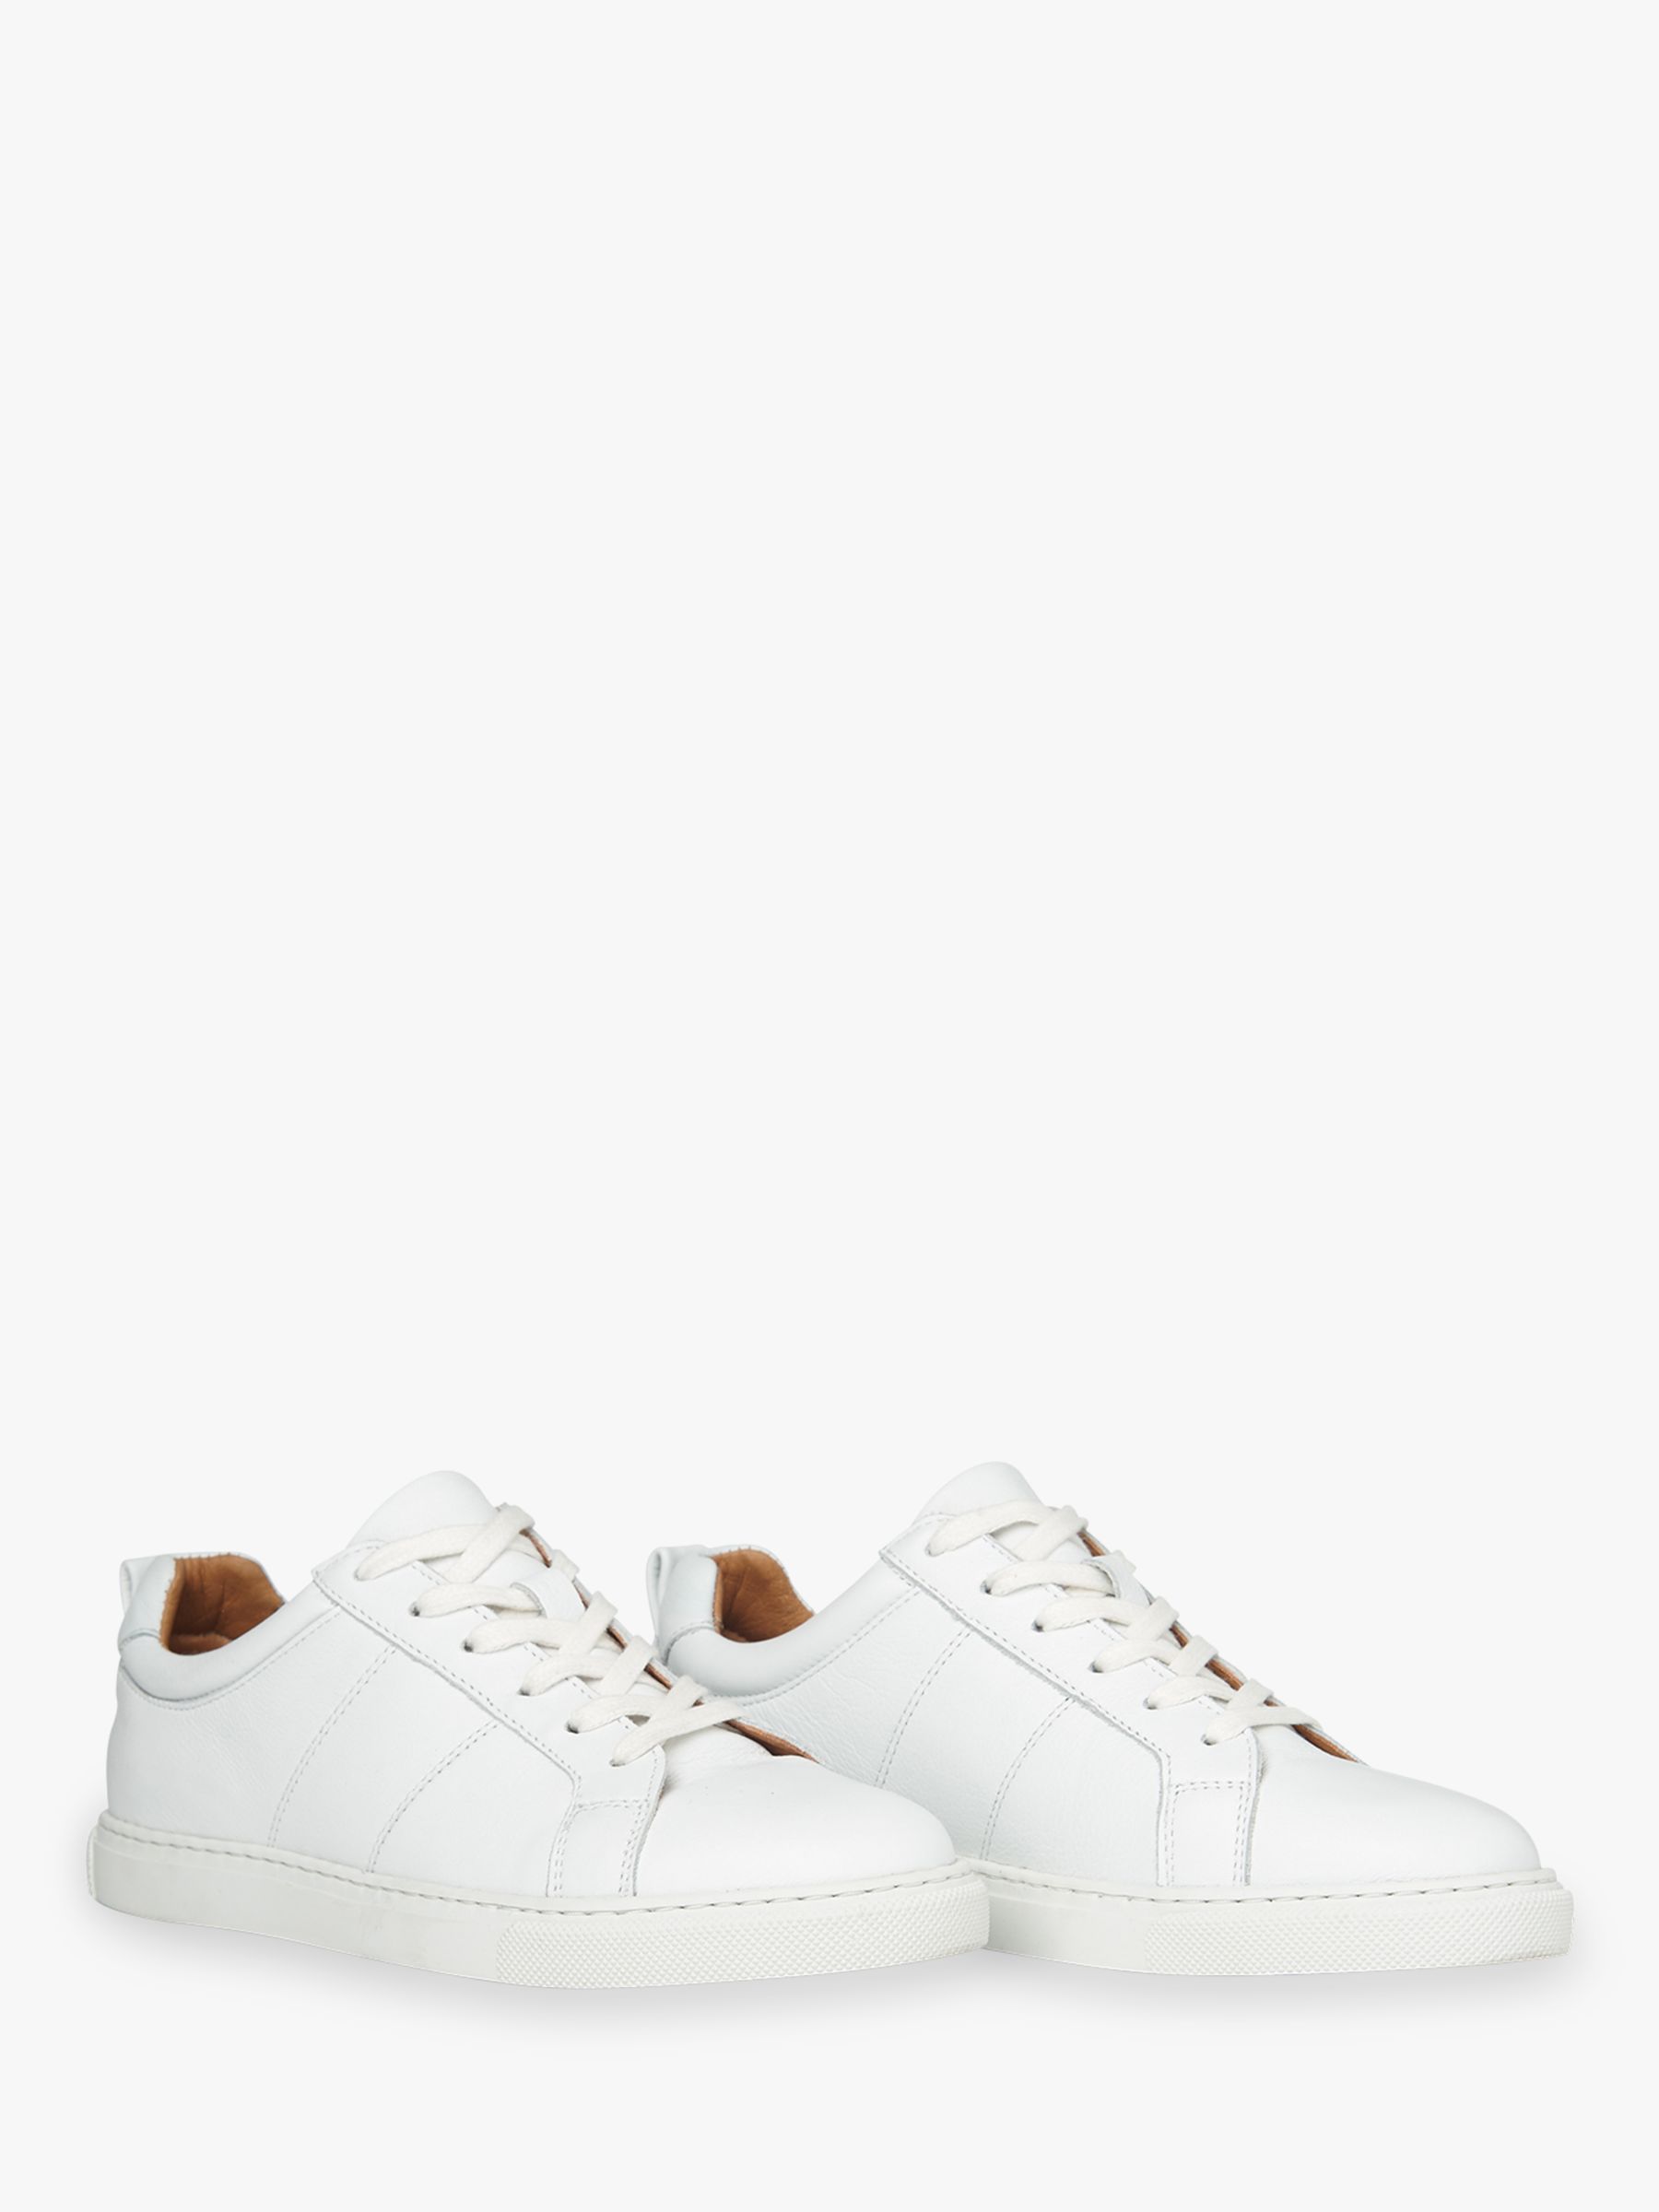 Whistles Koki Lace Up Leather Trainers, White